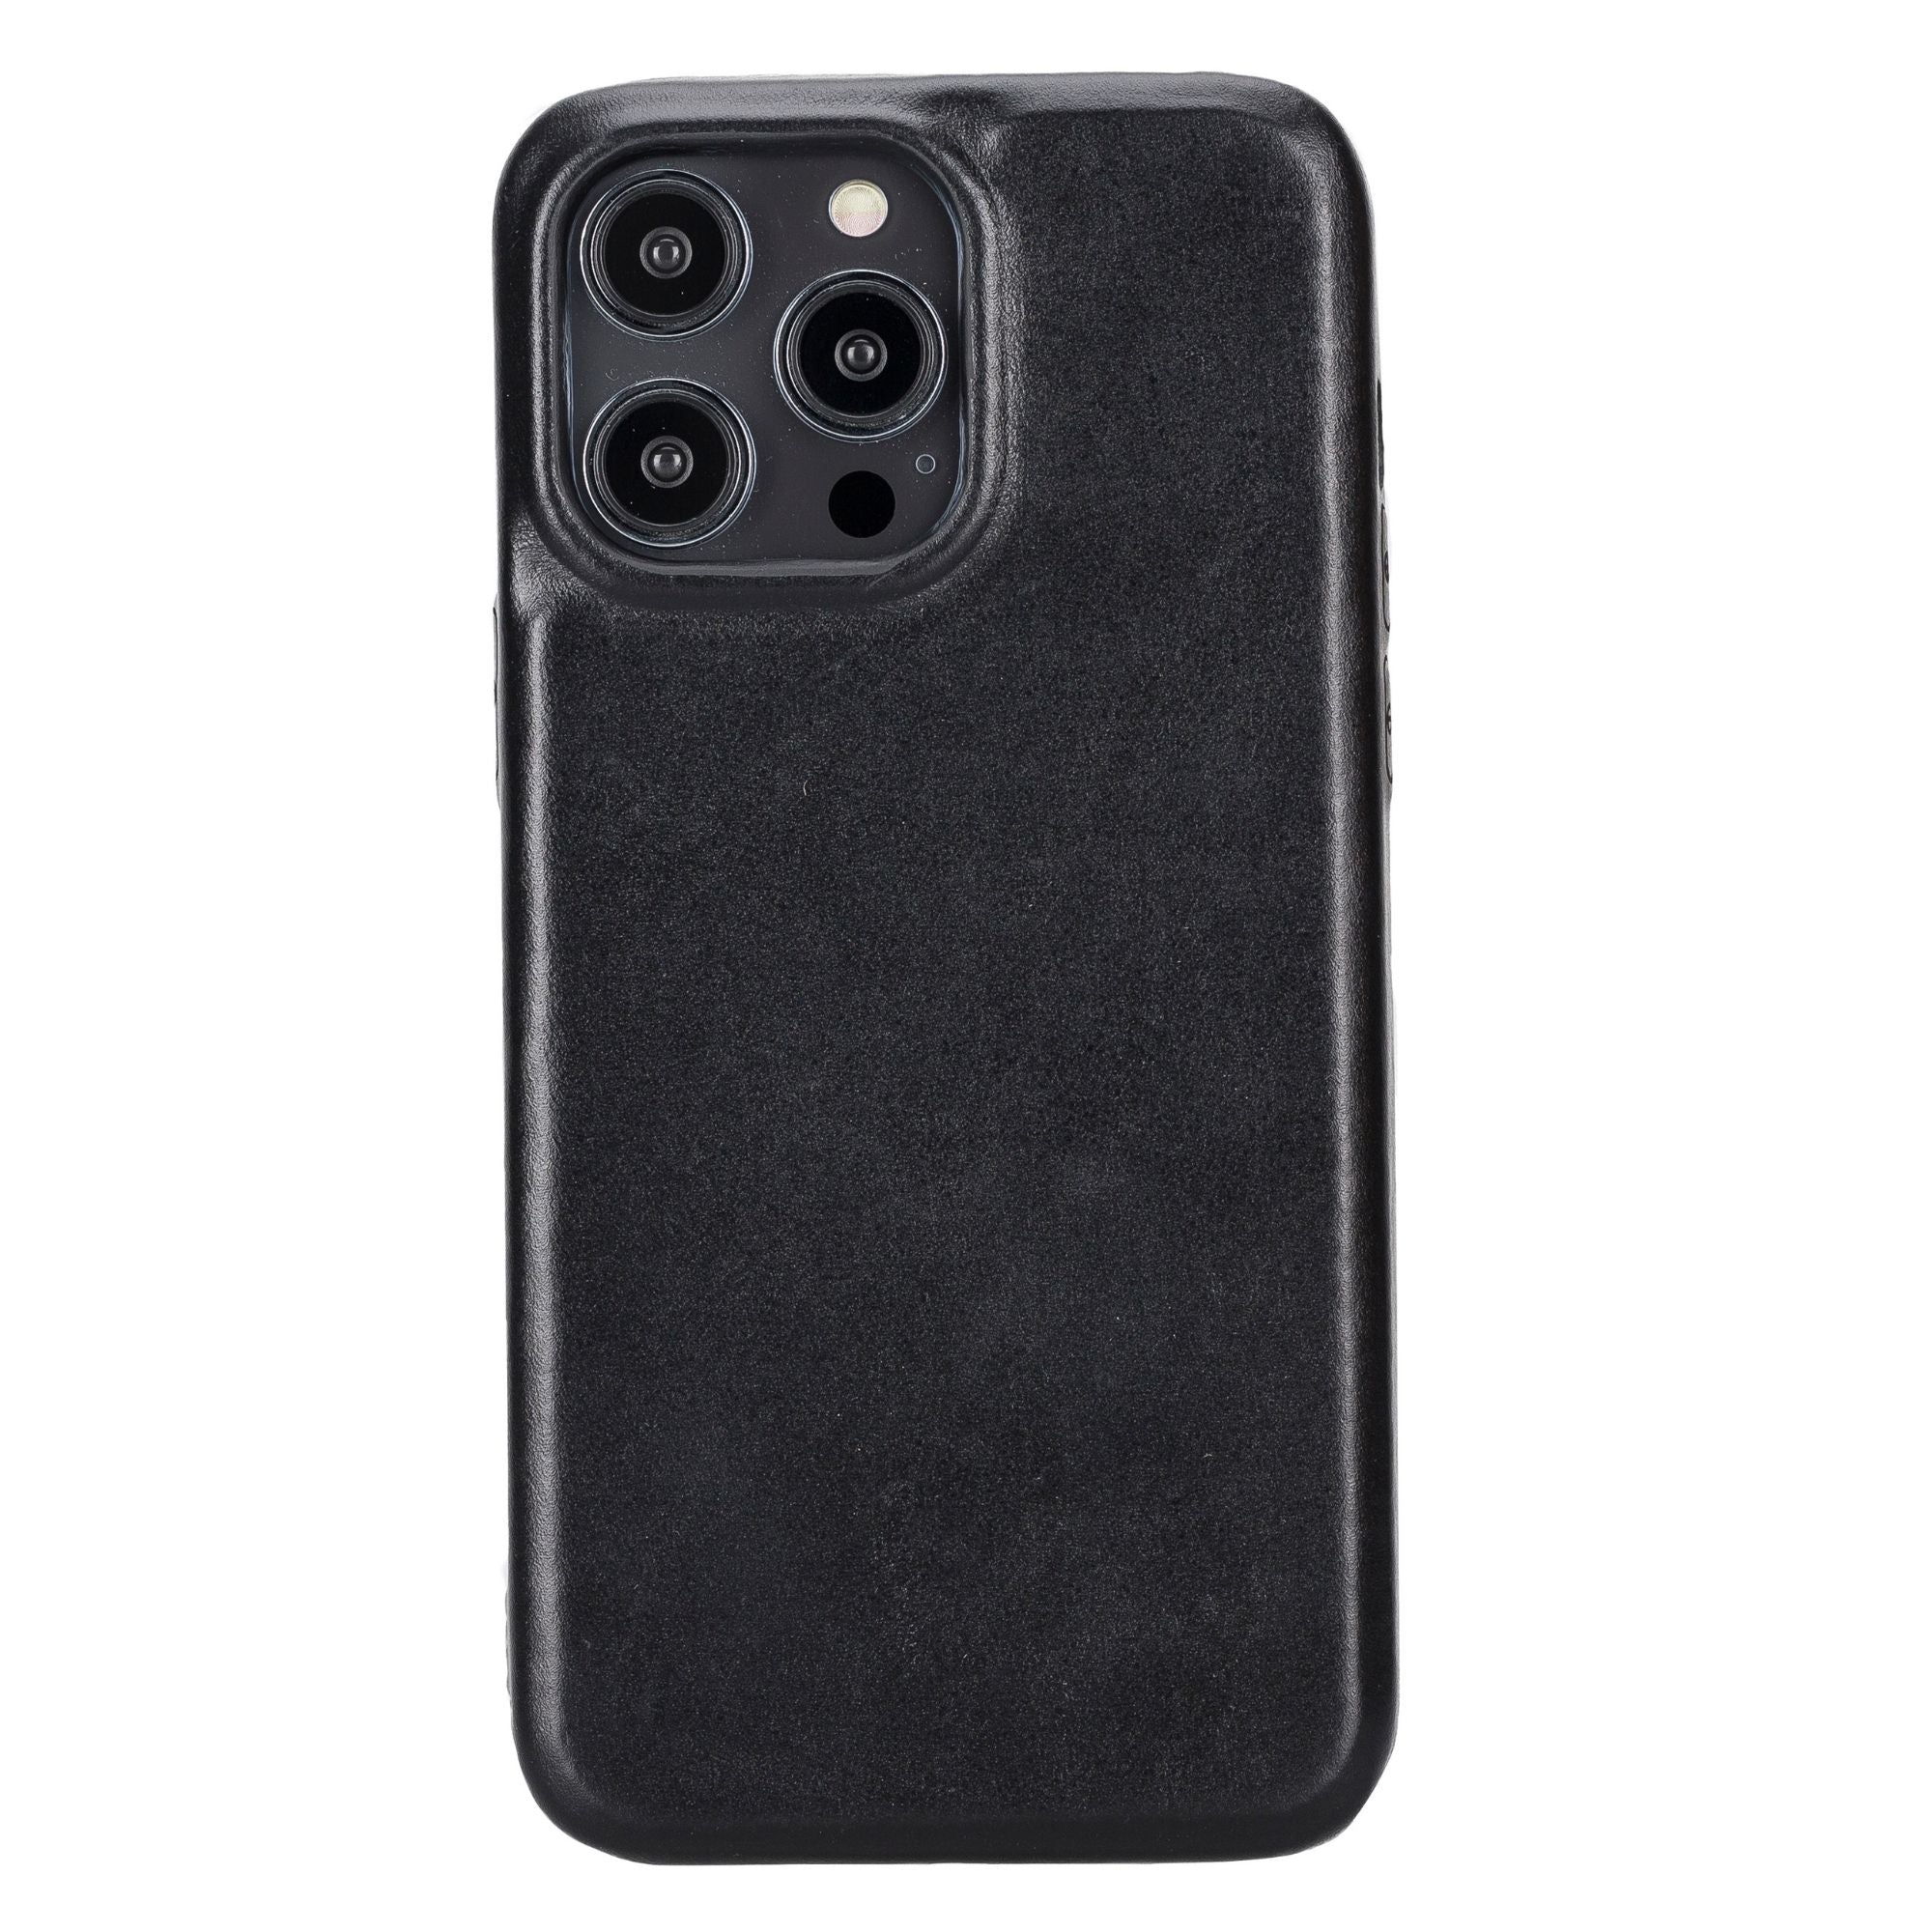 Pinedale Leather Snap-on Case for iPhone 12 Series - iPhone 12 Pro Max - Black - TORONATA